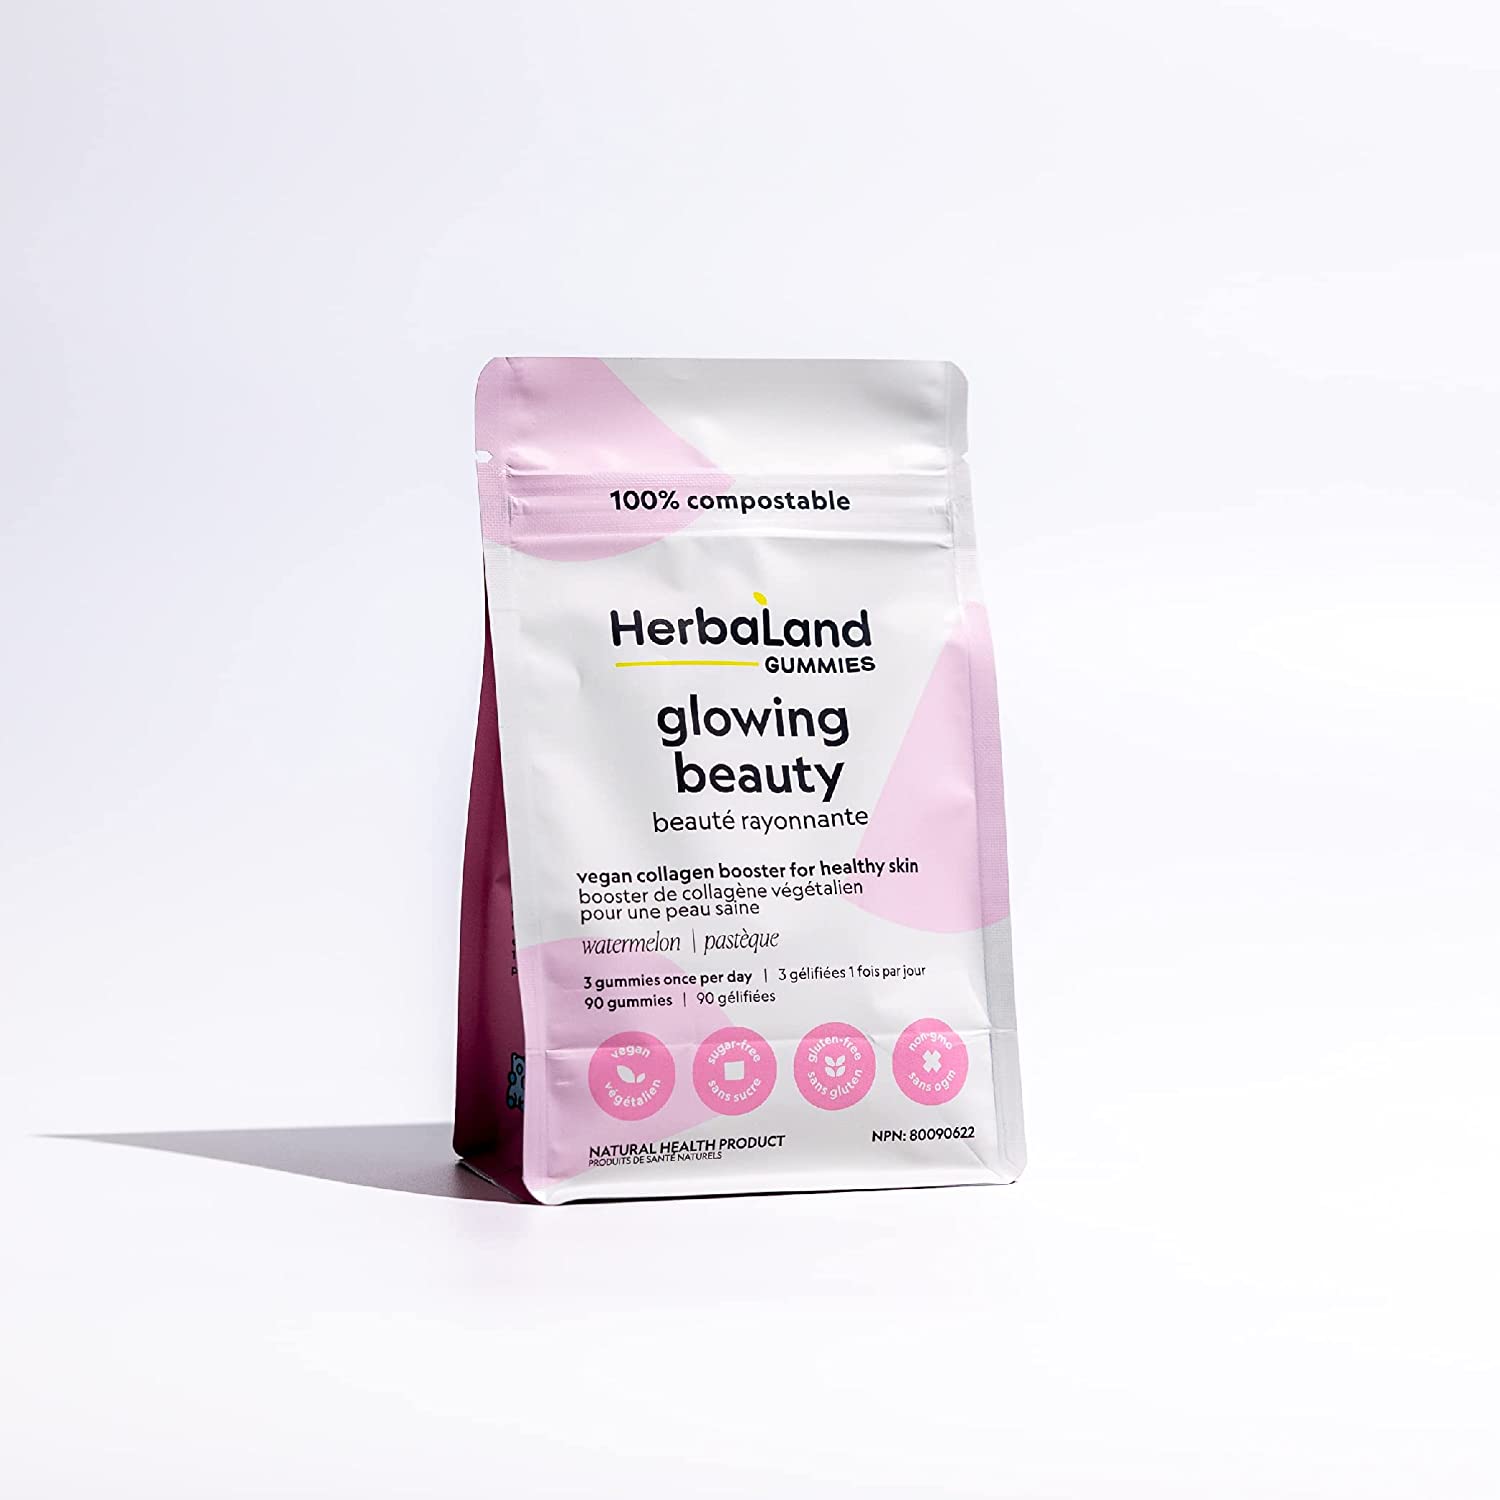 Herbaland Glowing Beauty Gummies for Adults